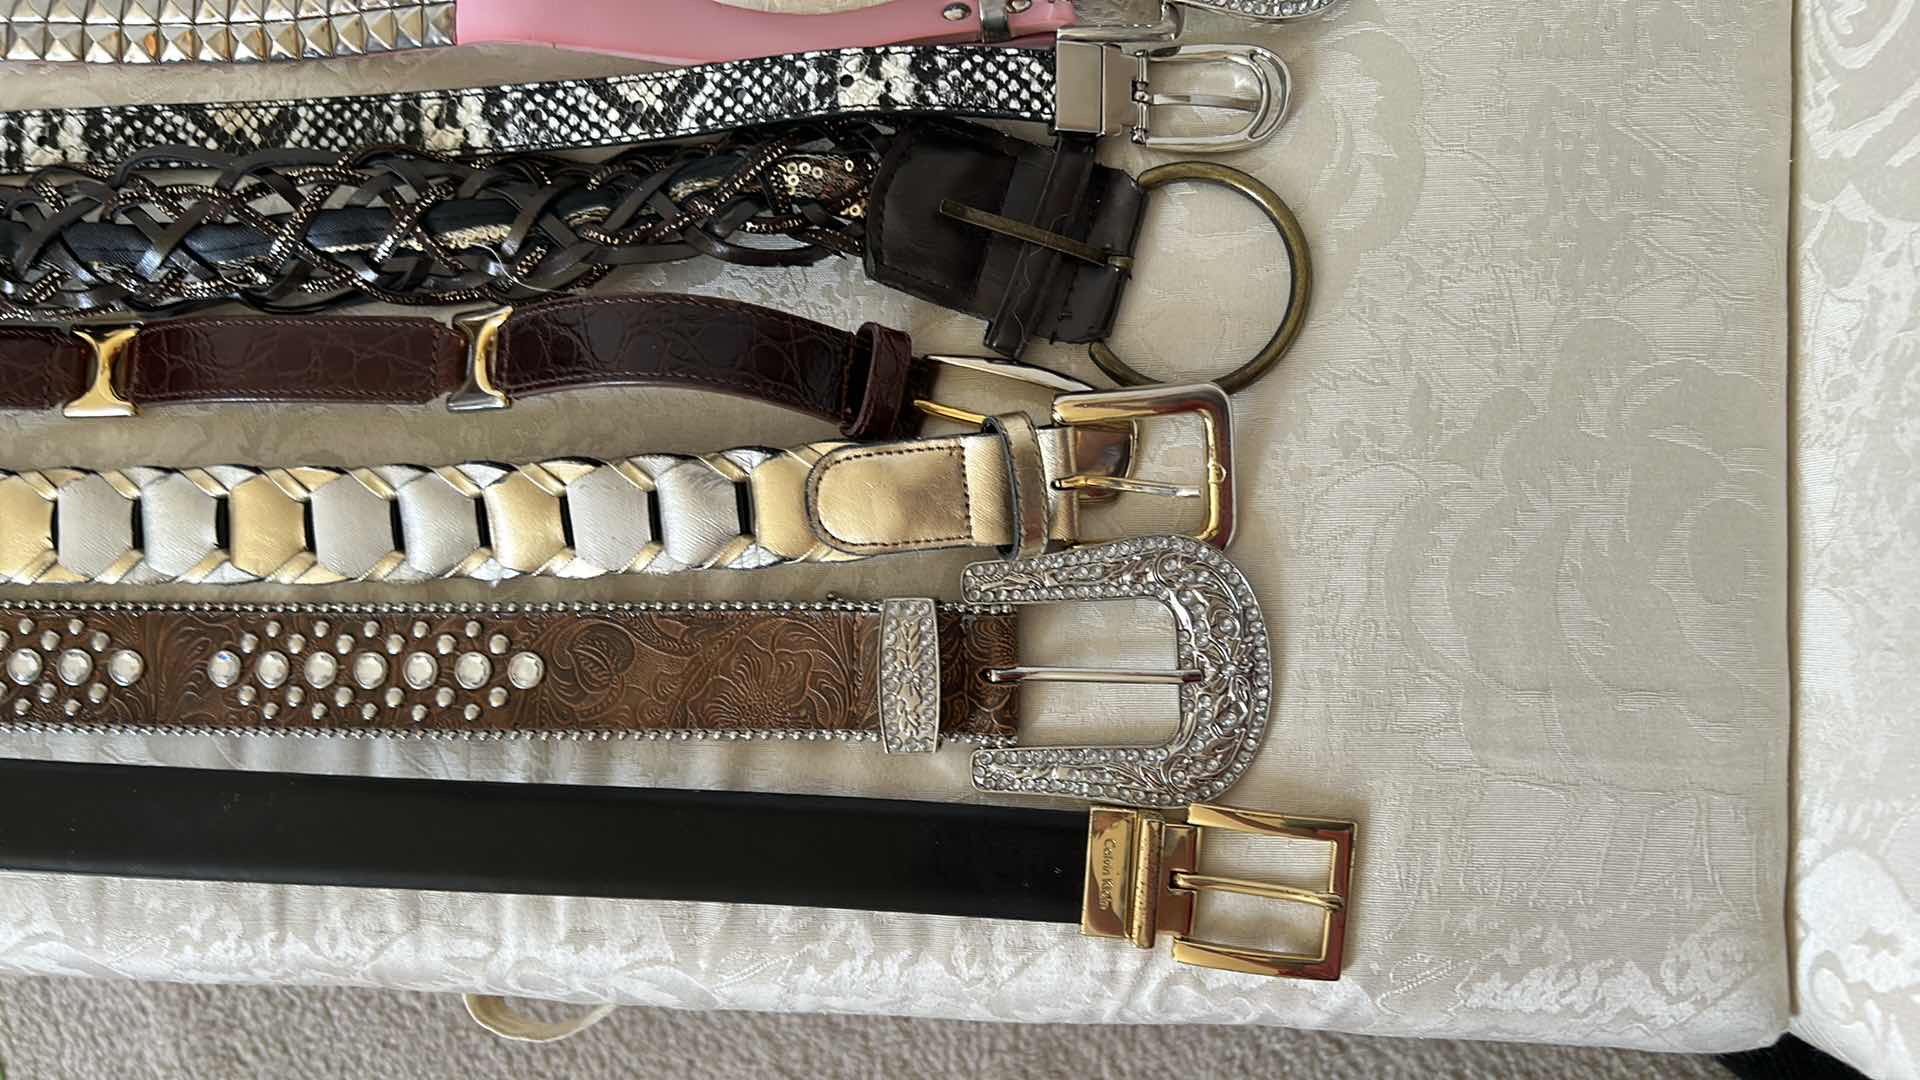 Photo 4 of 9 BELTS IN VARIOUS COLORS AND STYLES